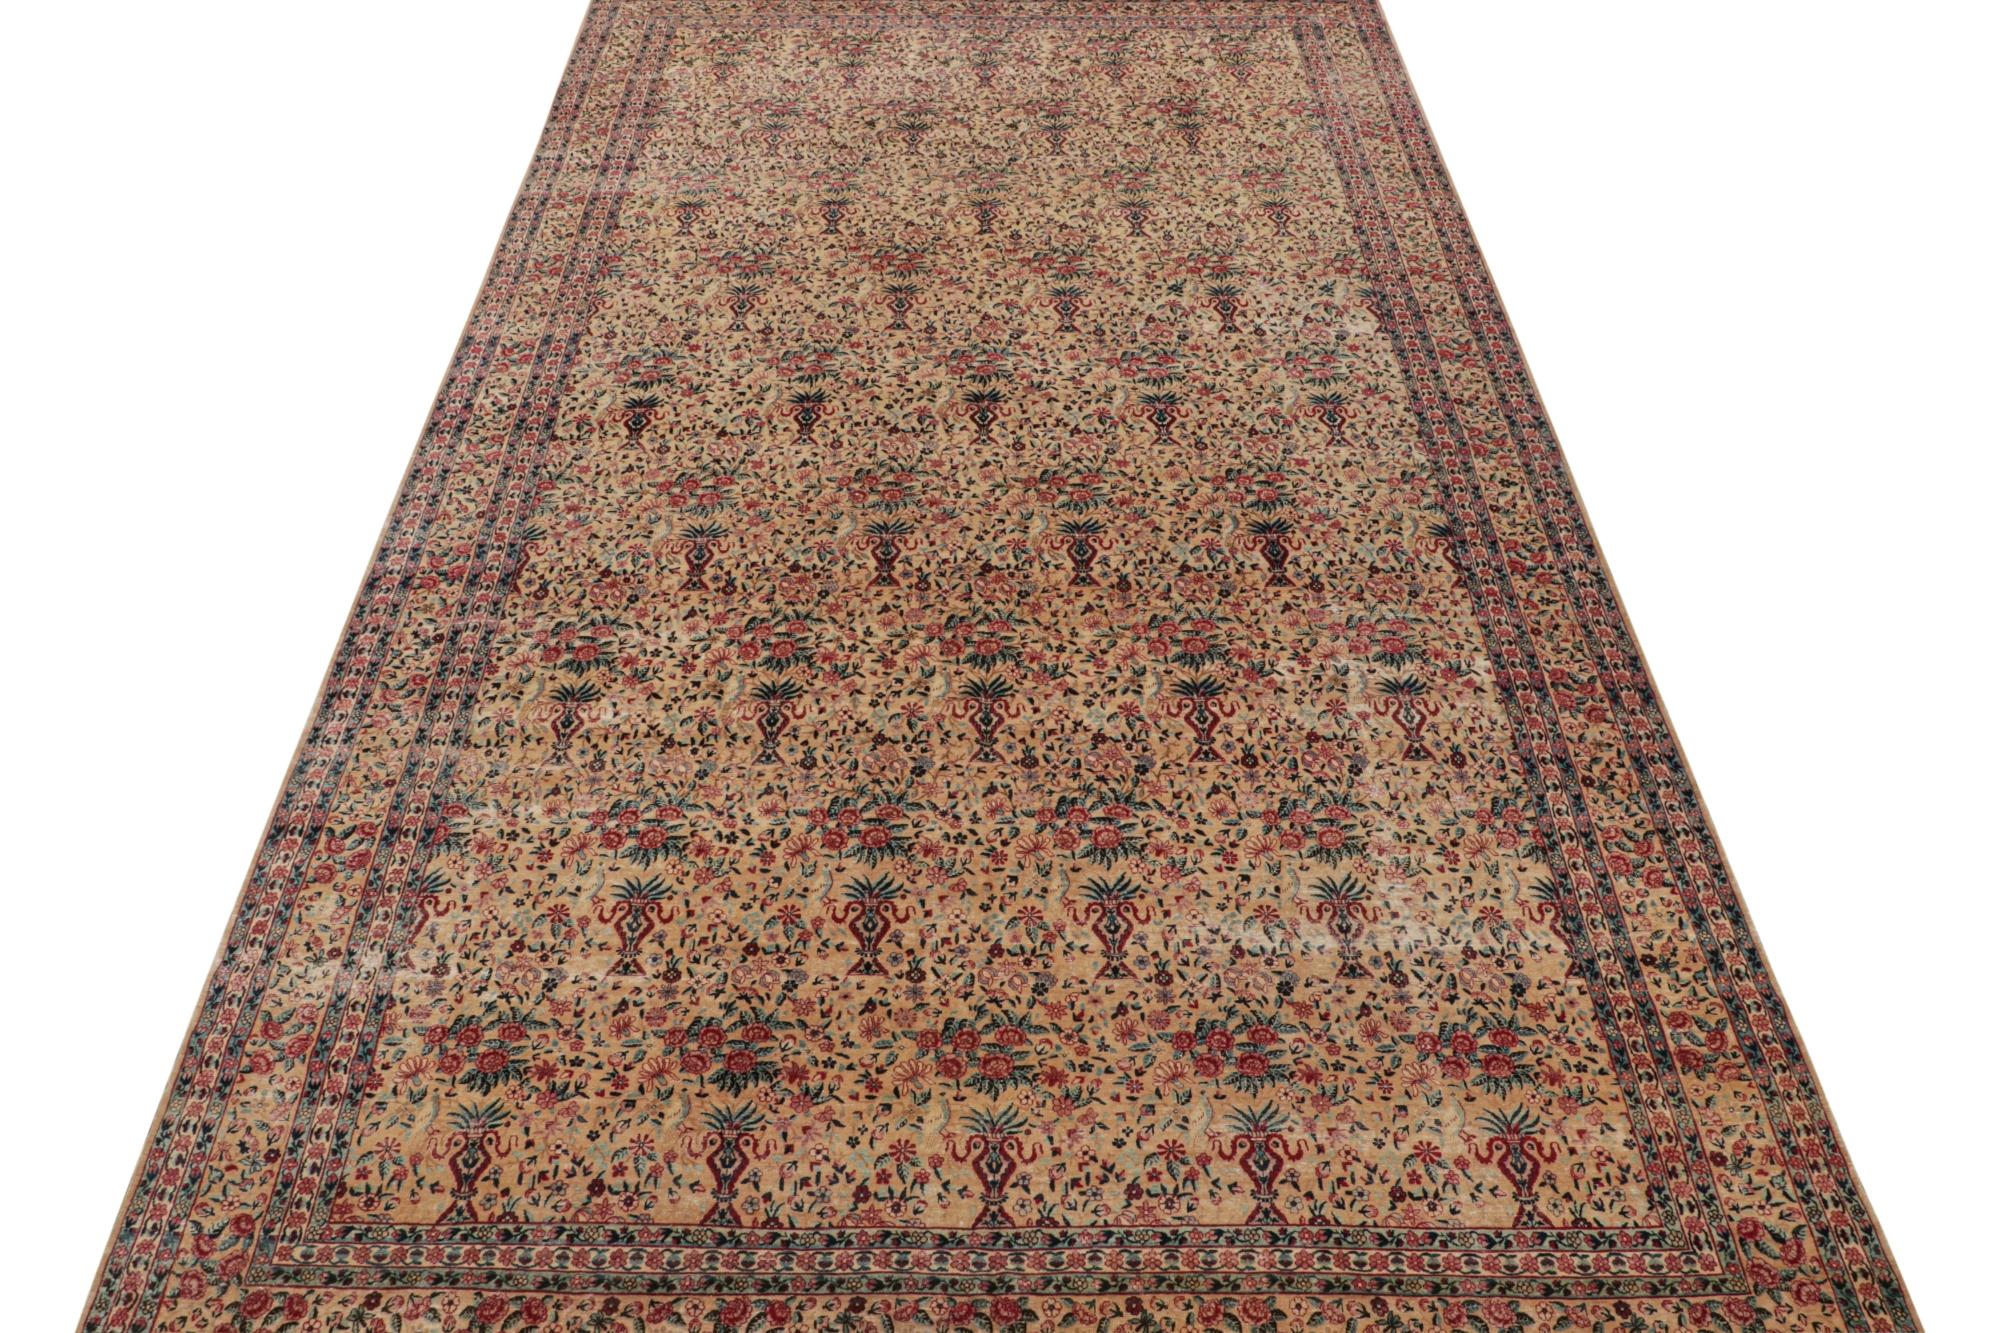 Early 20th Century Rare Antique Kerman Lavar Persian Rug with Floral Patterns, from Rug & Kilim For Sale